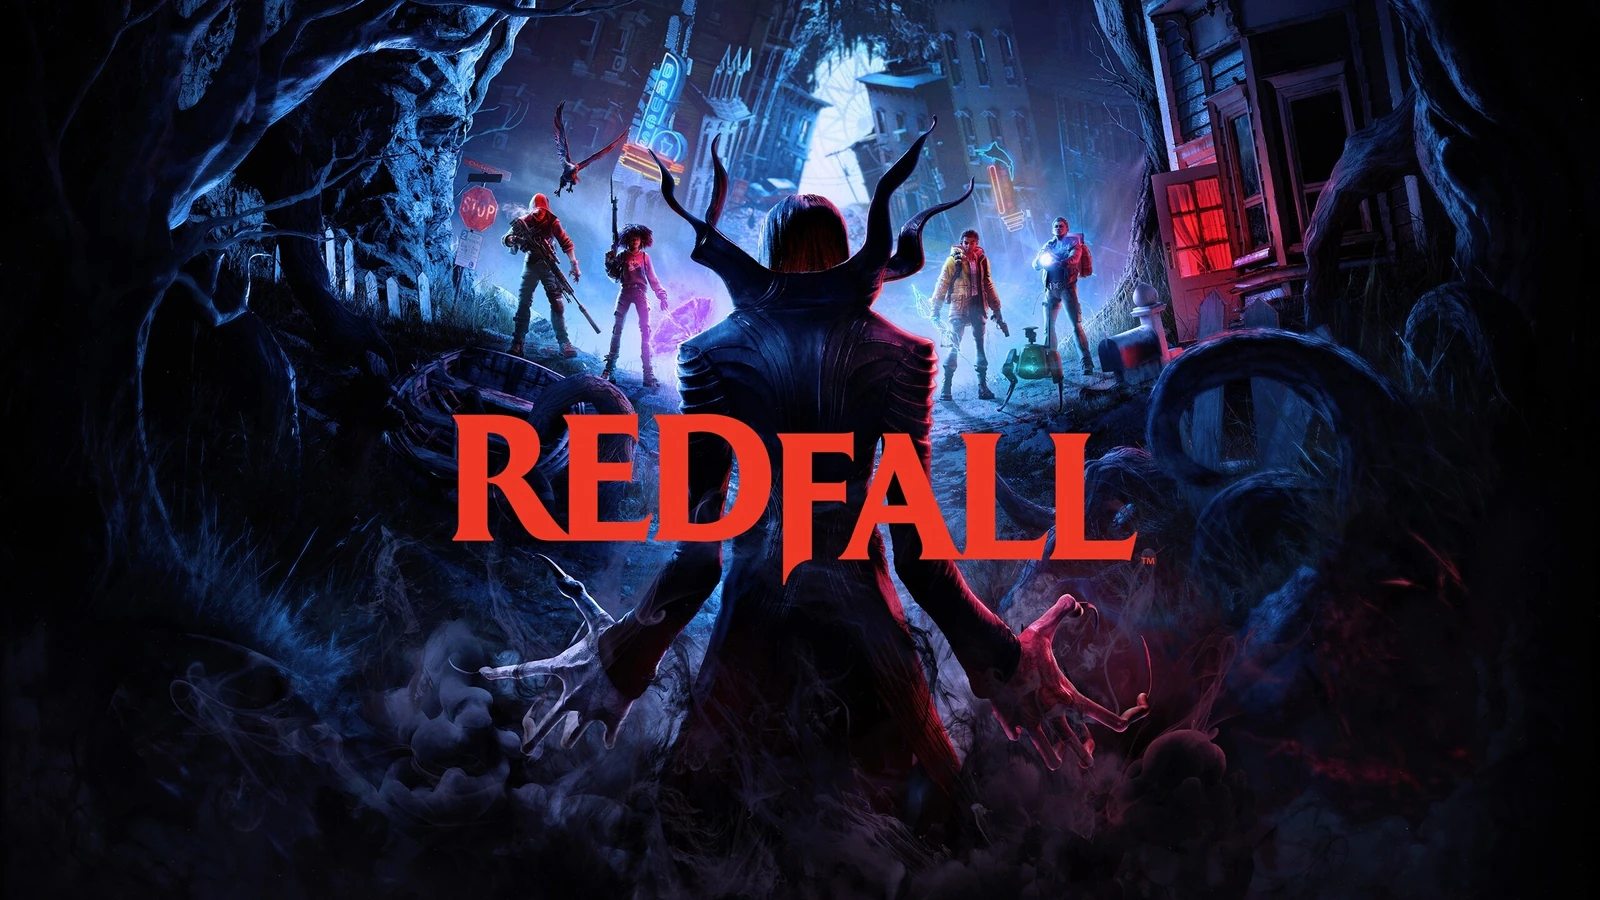 Performance Mode, Stealth Takedowns, and More in New Redfall Update